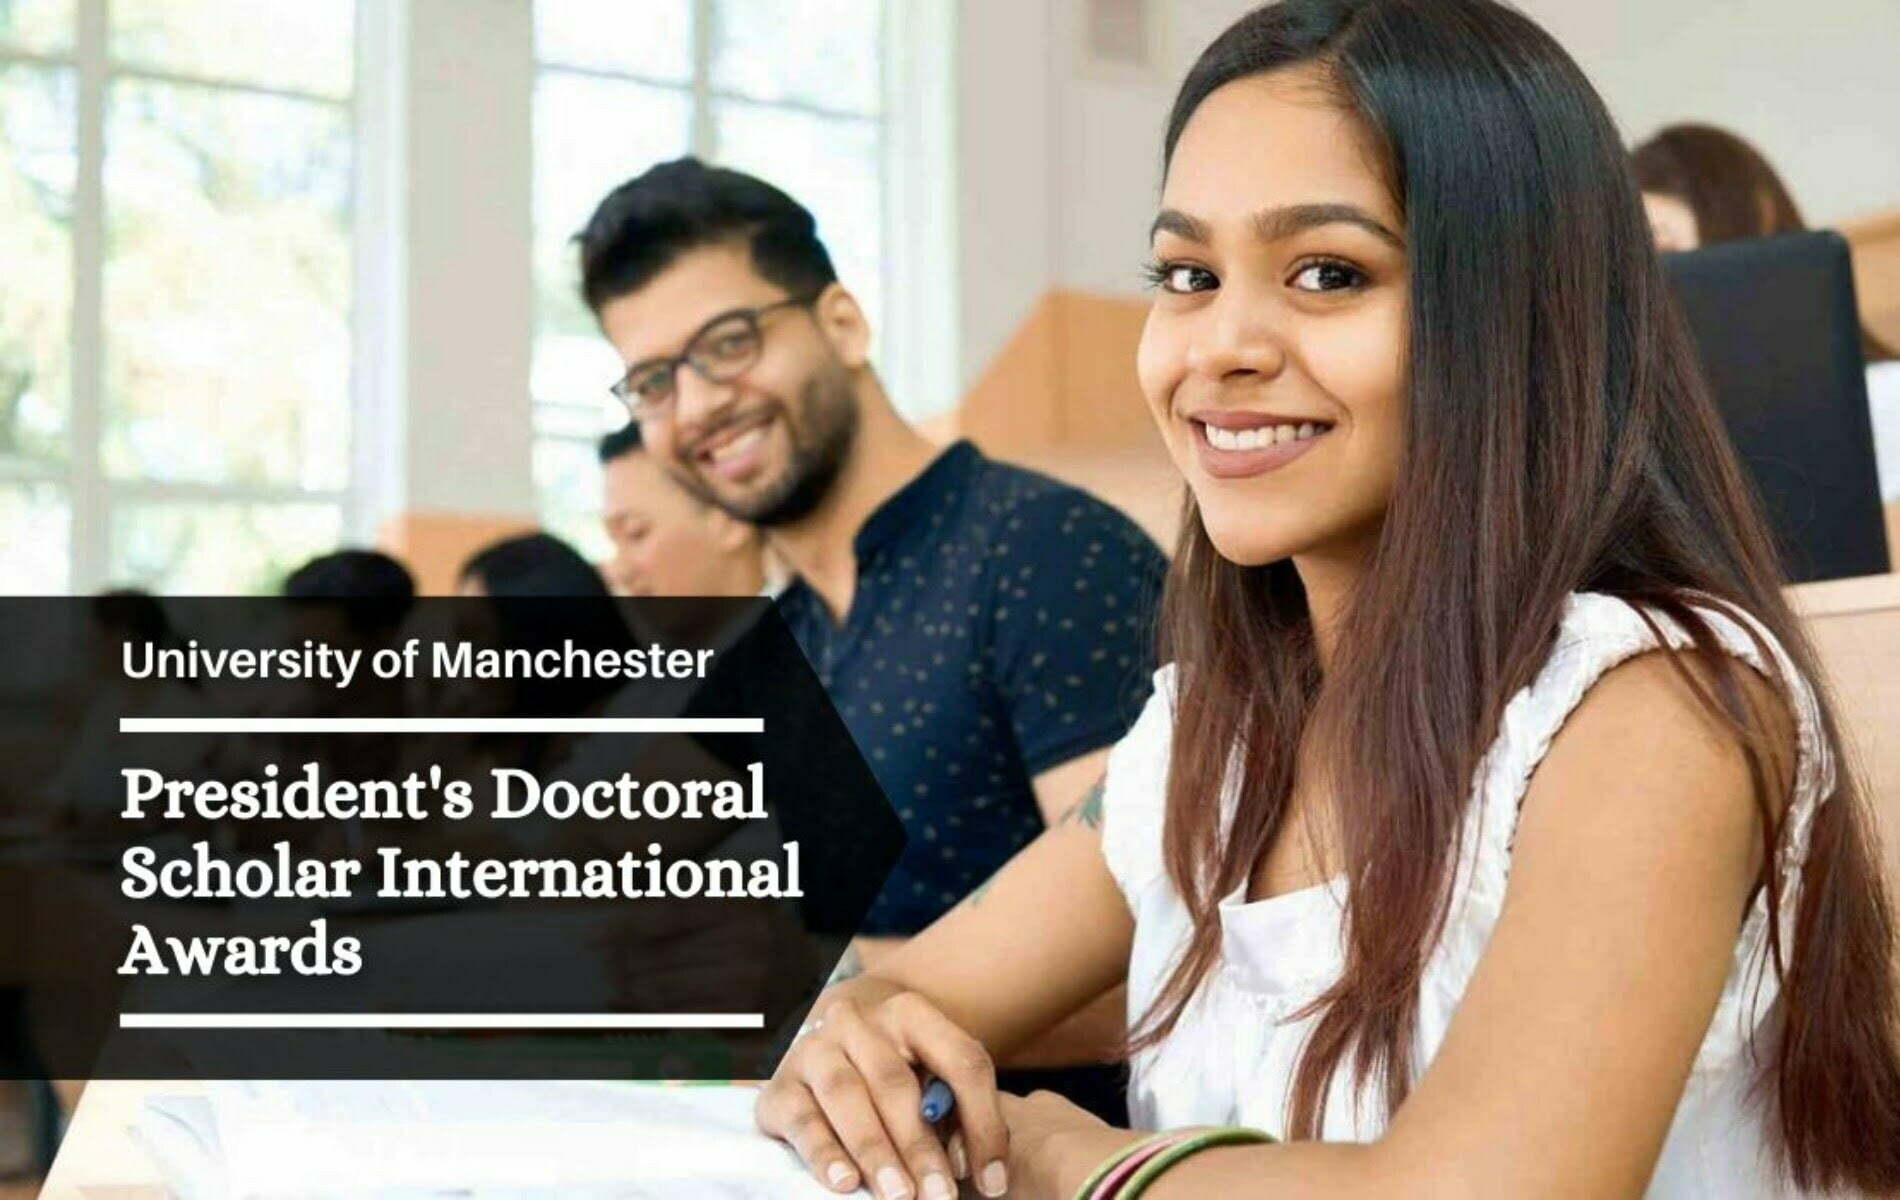 President’s Doctoral Scholar Award 2023 at the University of Manchester